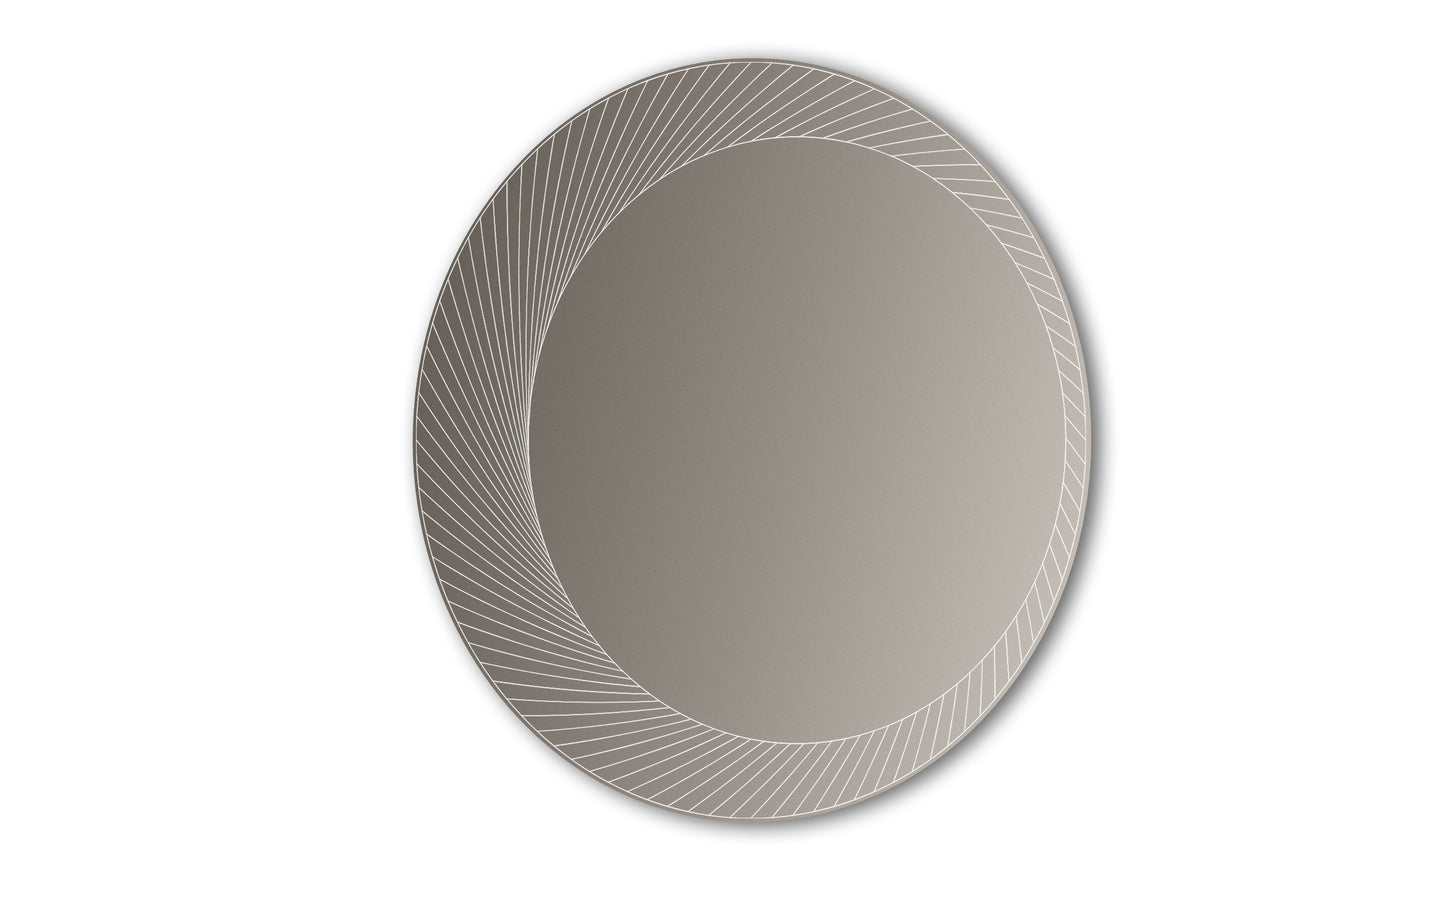 BH Mirror Round LED Lighting with Laser Edge & Magnifier